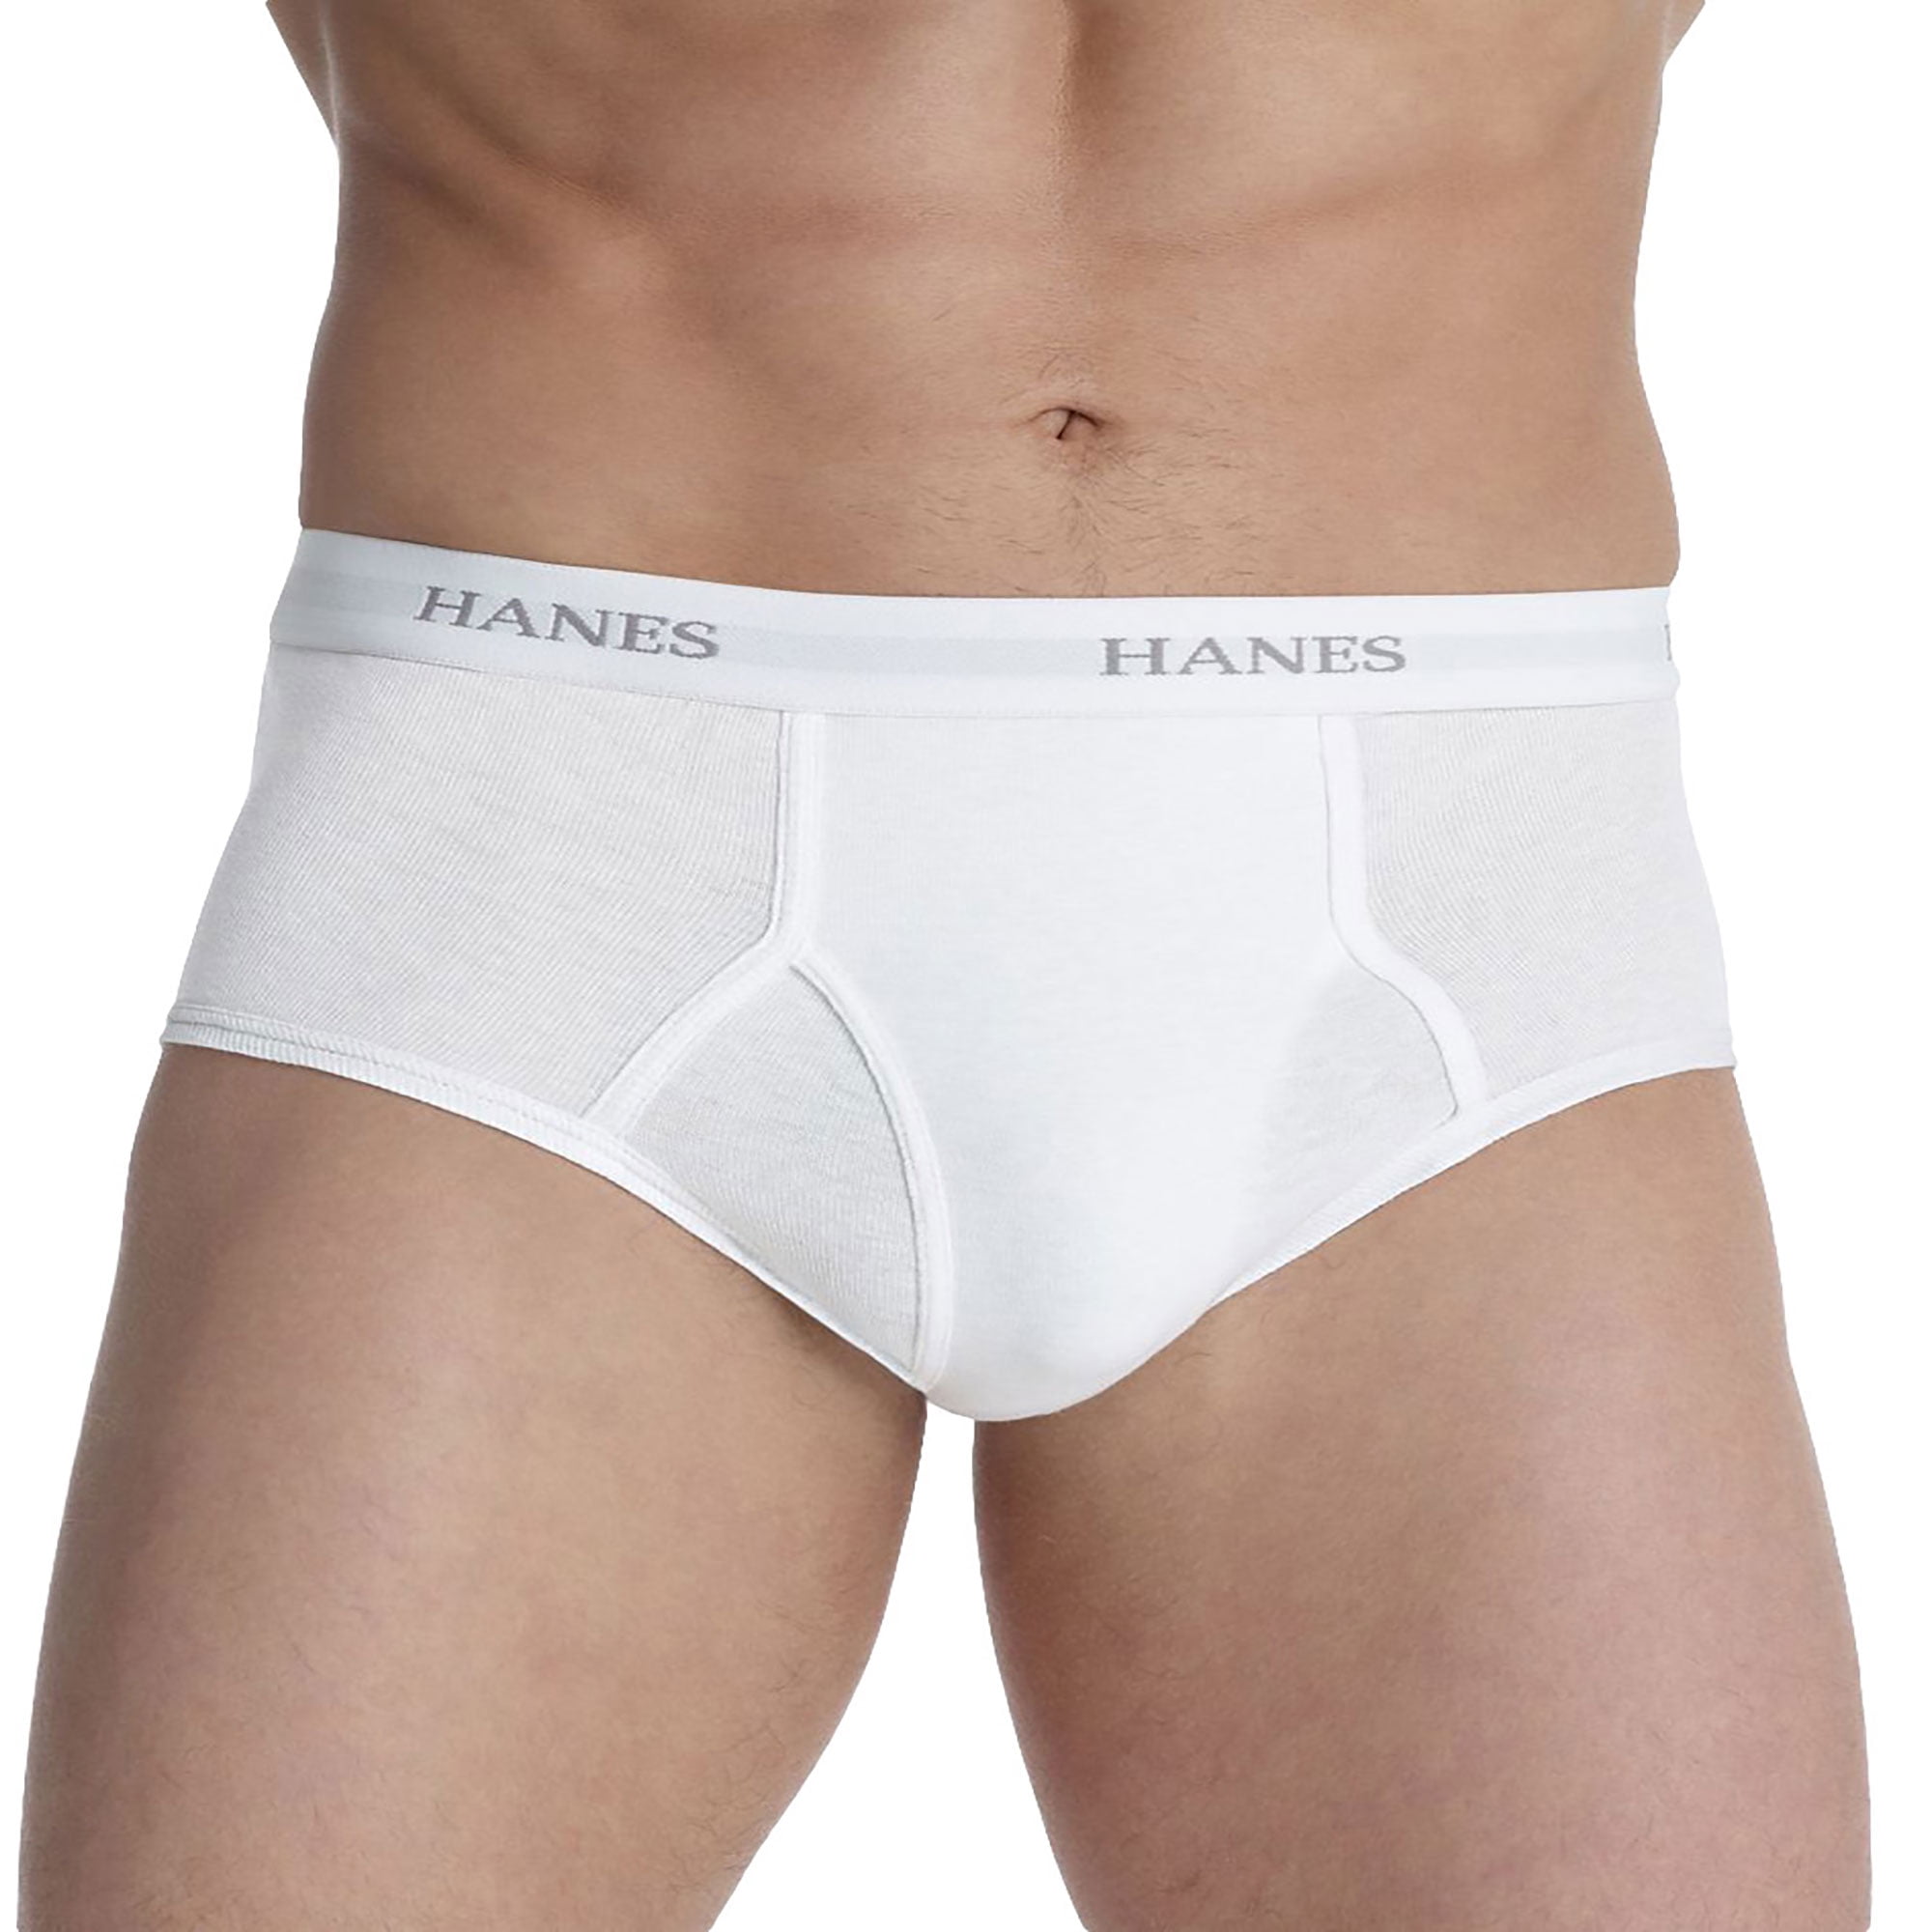 Hanes Men's Tagless No Ride Up Briefs with ComfortSoft Waistband